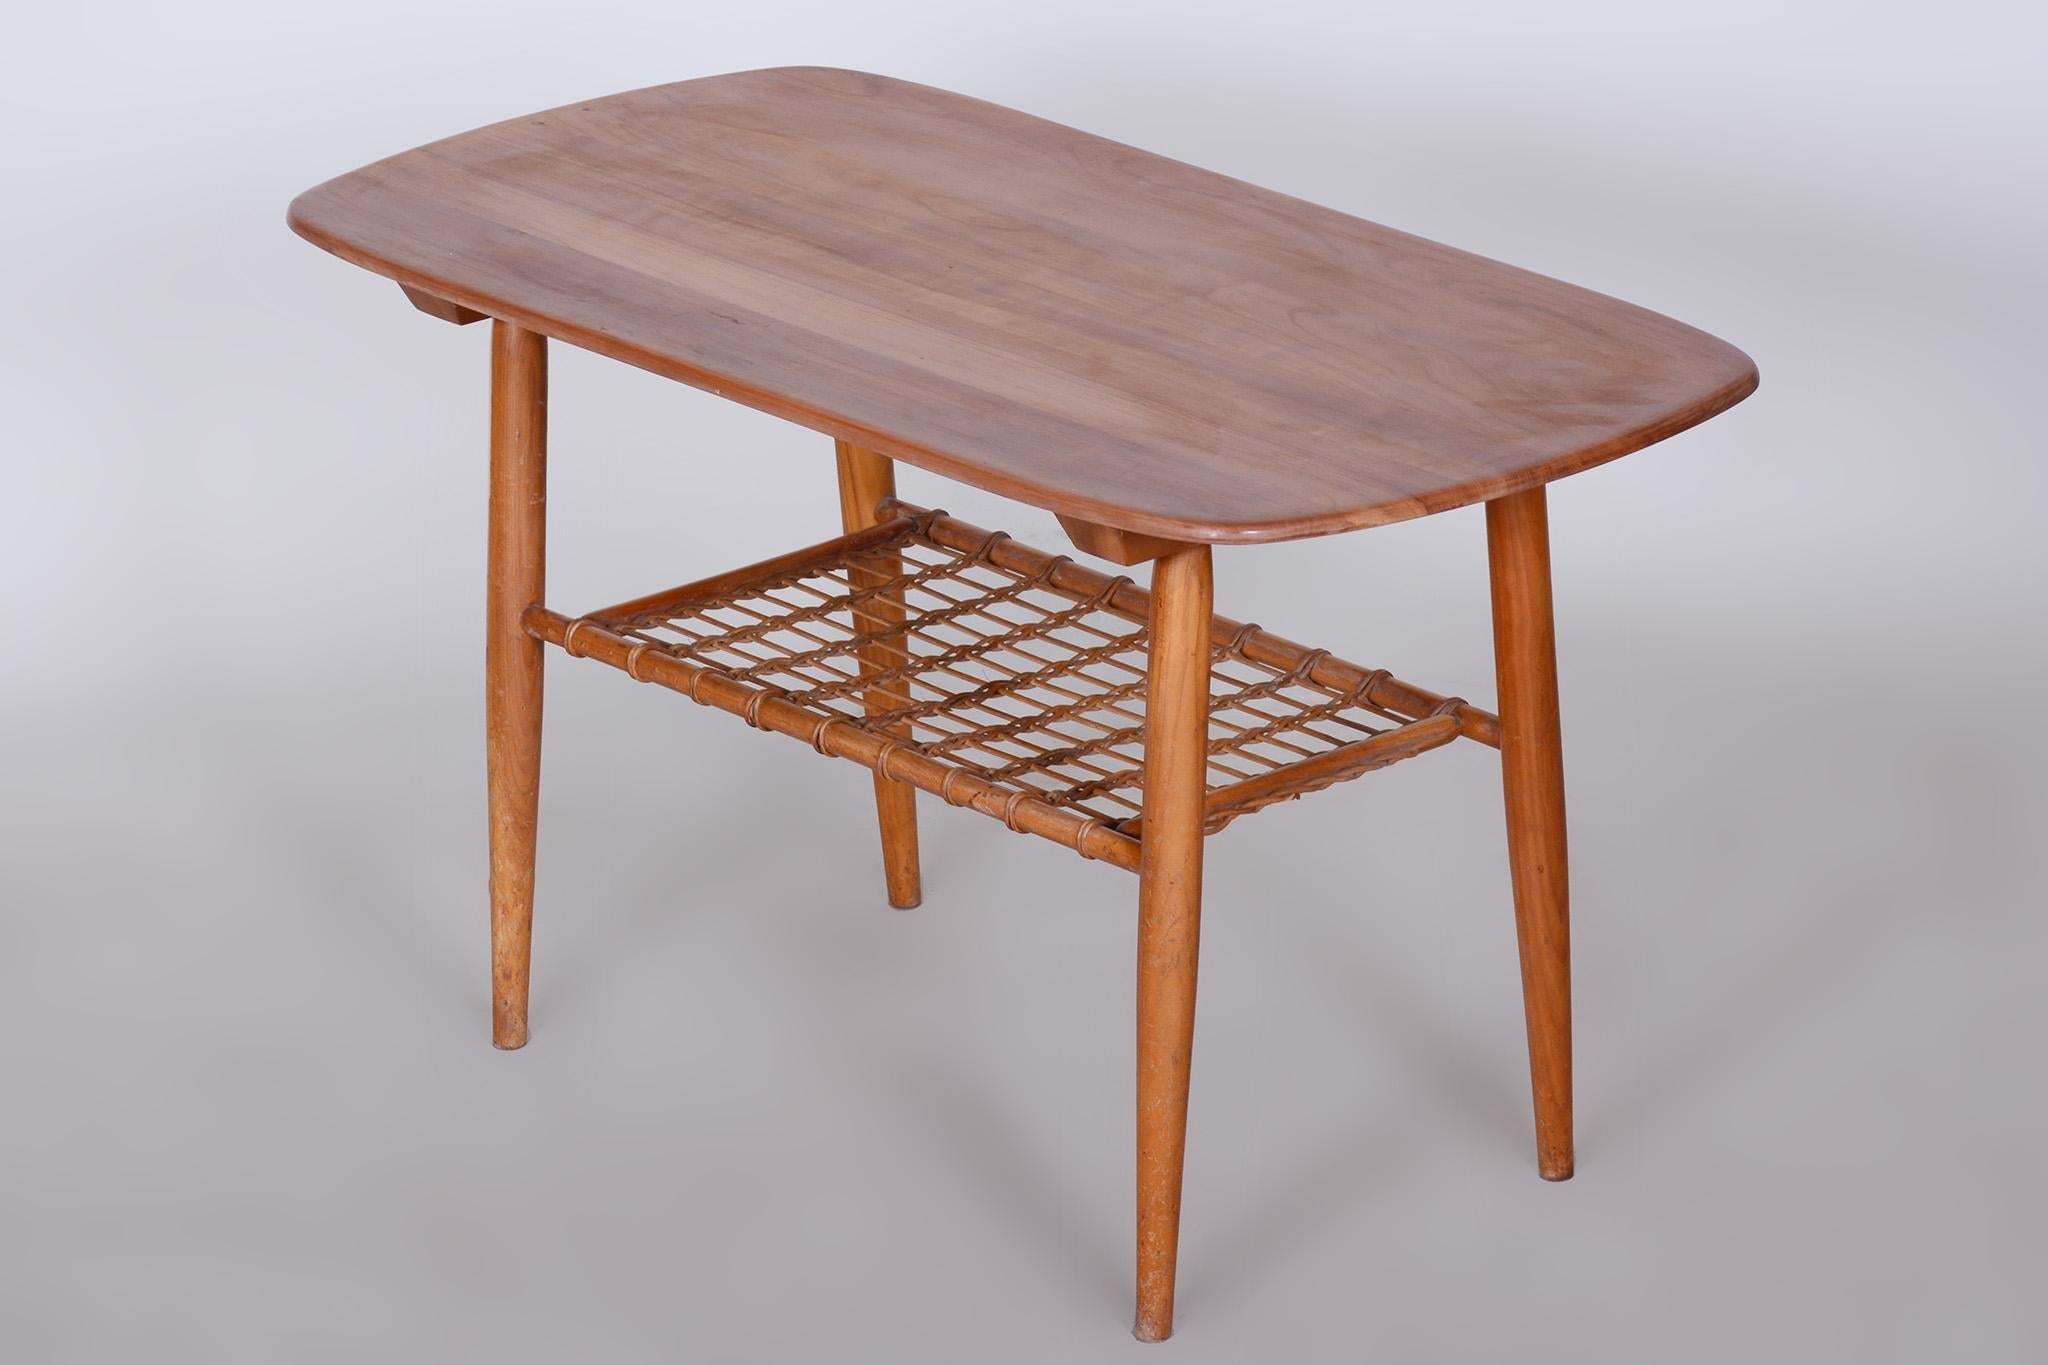 Restored Mid-Century Style Coffee Table, Cherry-Tree, Rattan, 1950s, Czechia For Sale 2